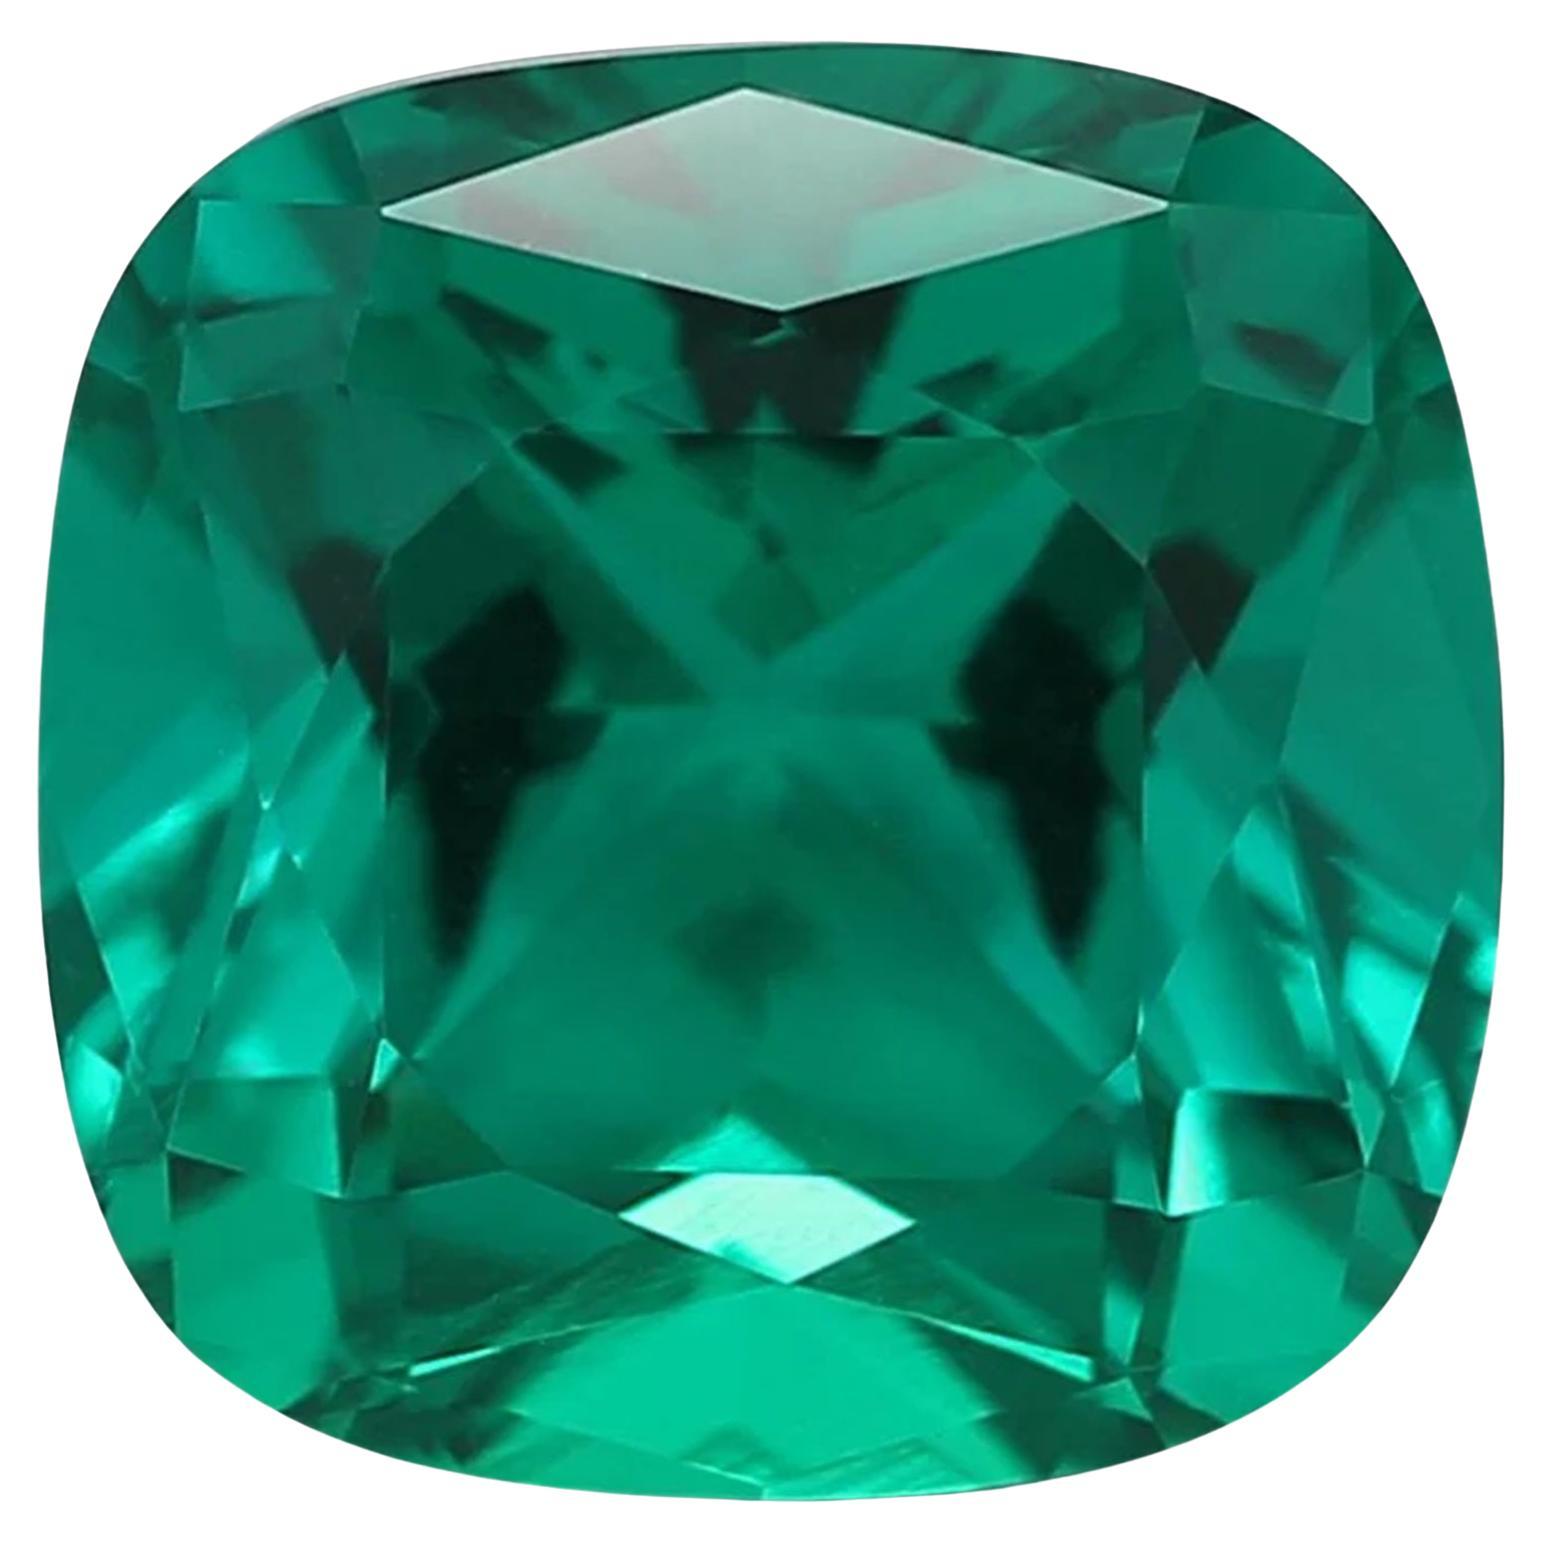 our magnificent 27.18 carat rectangular cushion-cut vivid green corundum gemstone. This stunning gem measures 19.07 x 17.30 x 13.19 mm, showcasing unparalleled brilliance and depth.

Each facet of this gem has been meticulously cut to perfection,